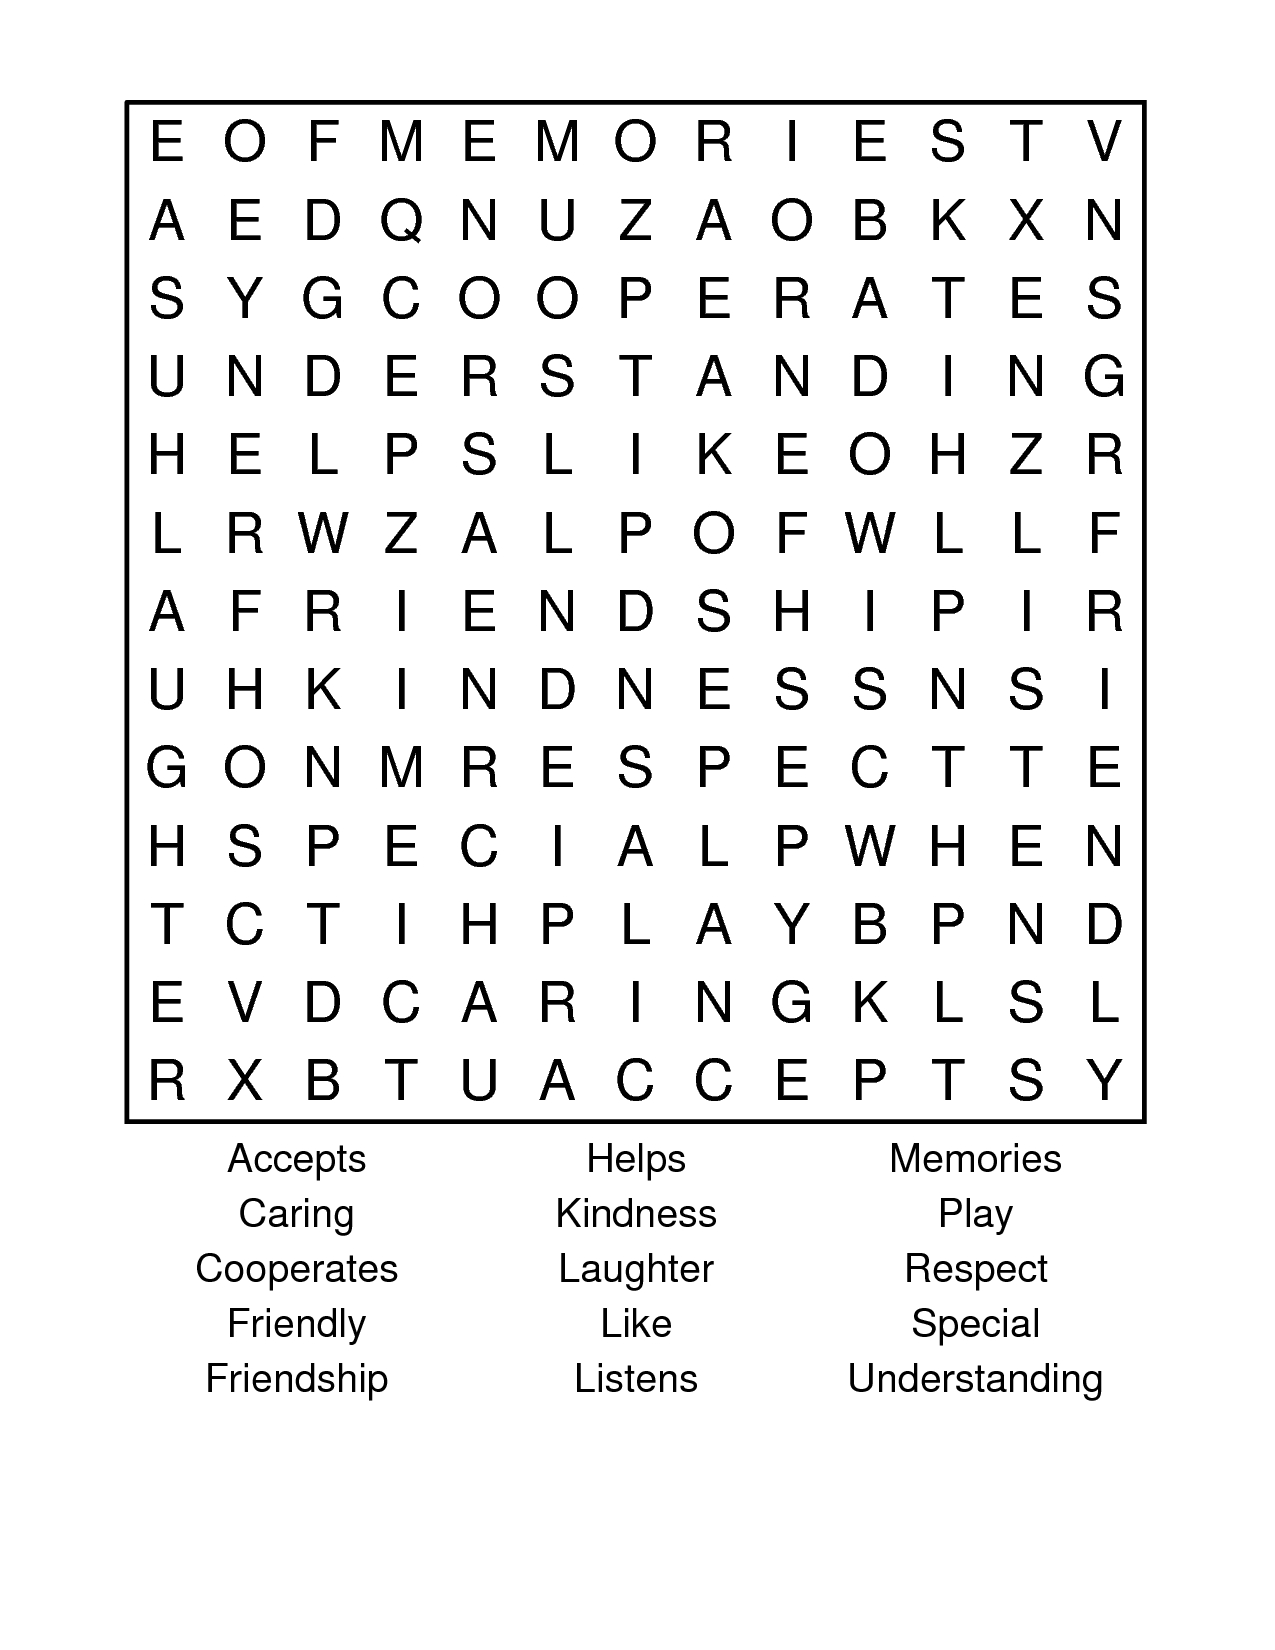 Free Printable Friendship Word Search | Scope Of Work